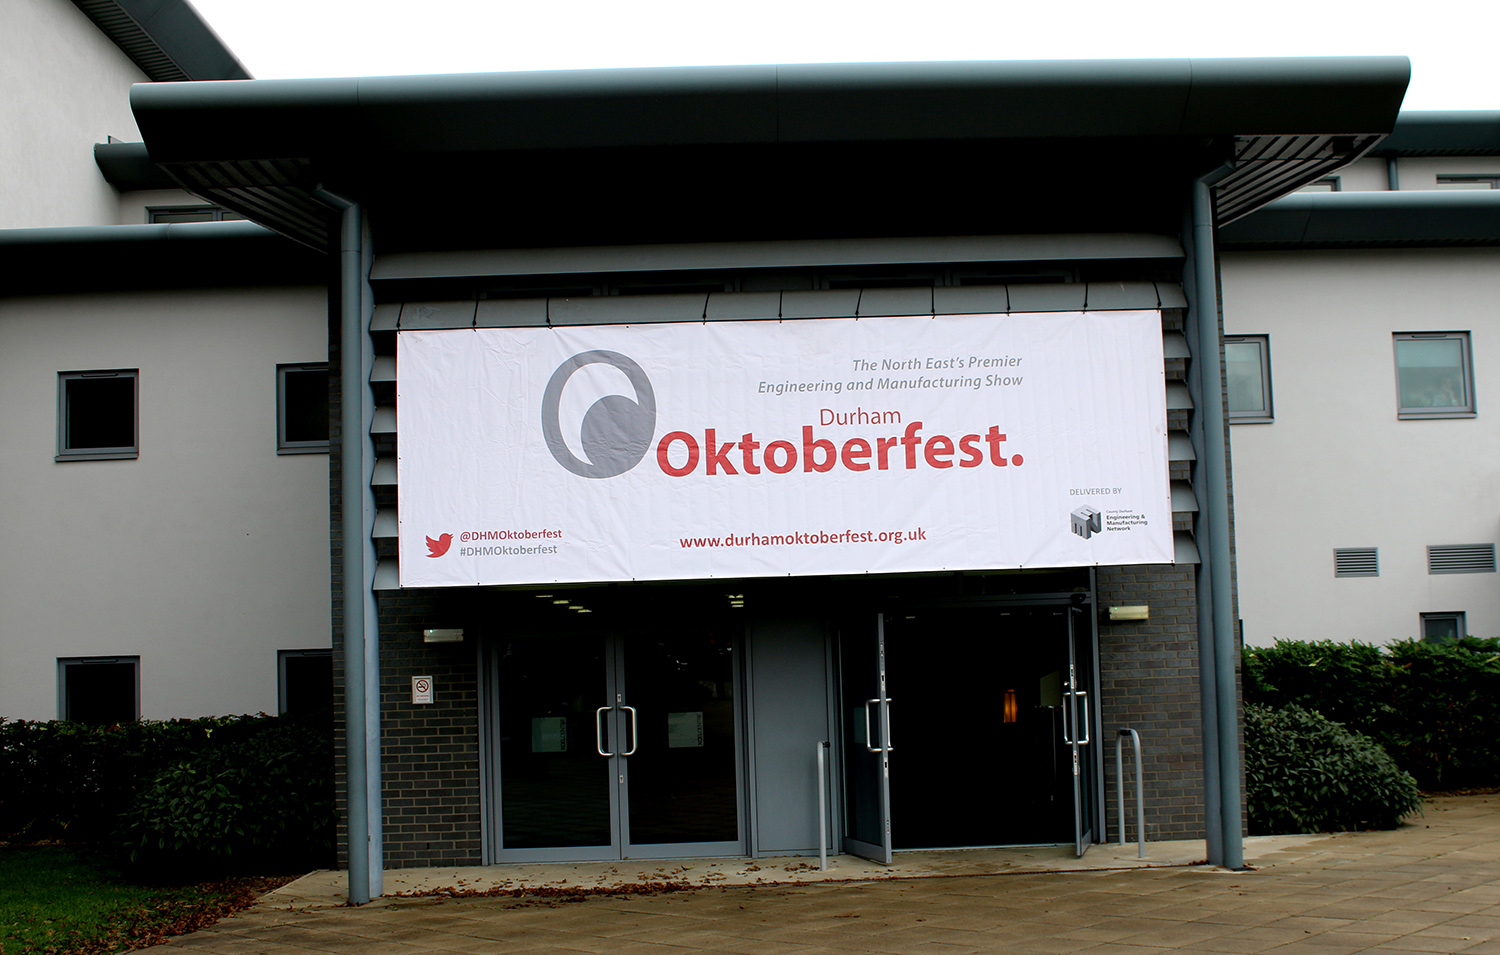 Opportunity for Small Firms to Exhibit at Oktoberfest